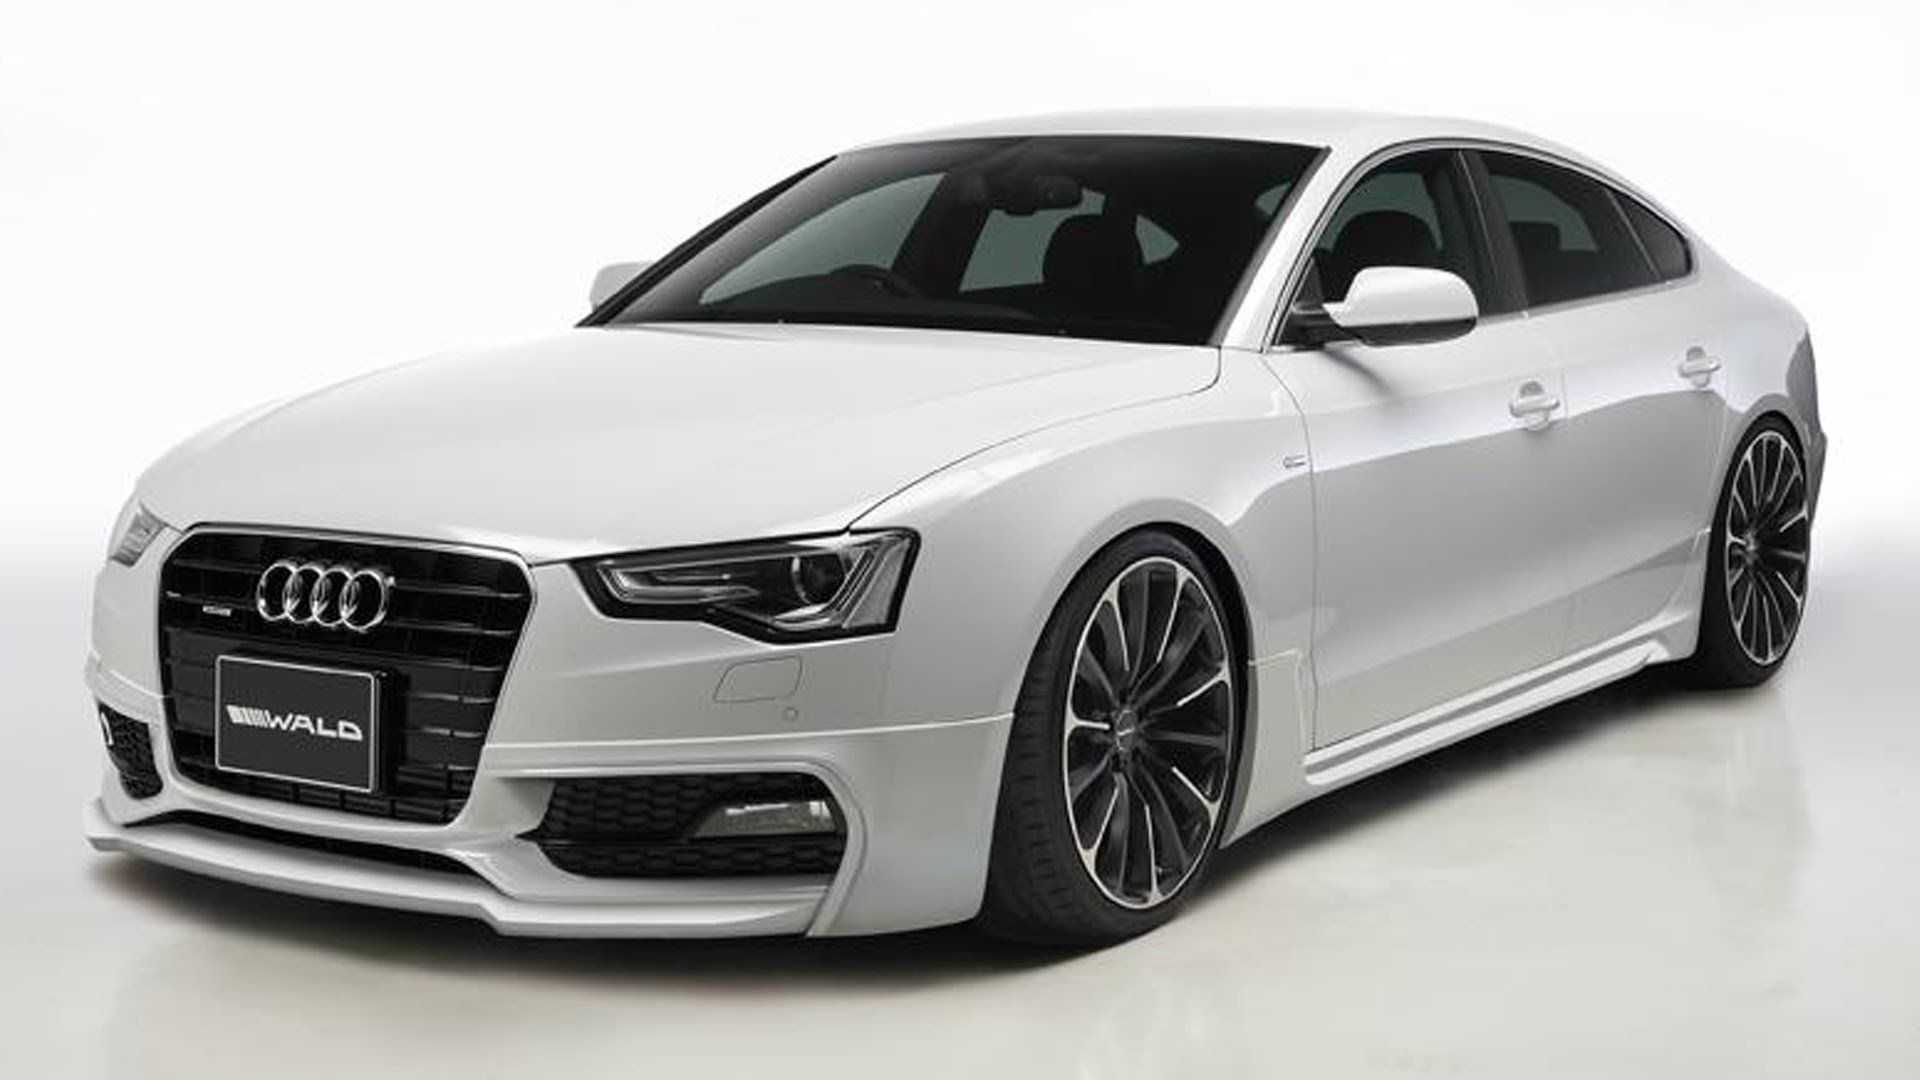 Audi Wallpaper On Cars A5 Coupe